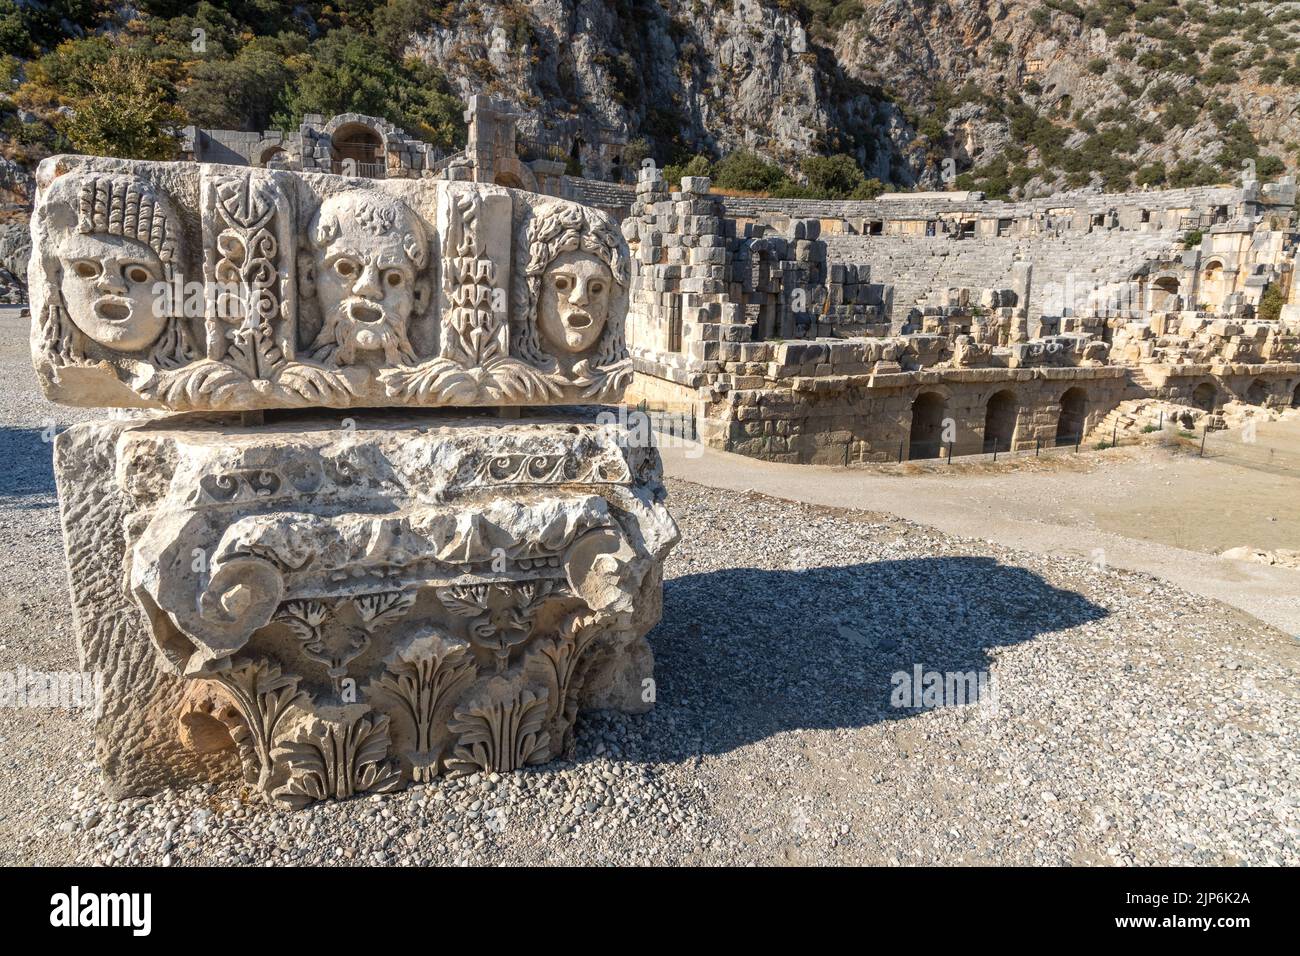 Historical Stone faces and ancient theater at Myra ancient city. Rock-cut tombs Ruins in Lycia region, Demre, Antalya, Turkey. Stock Photo